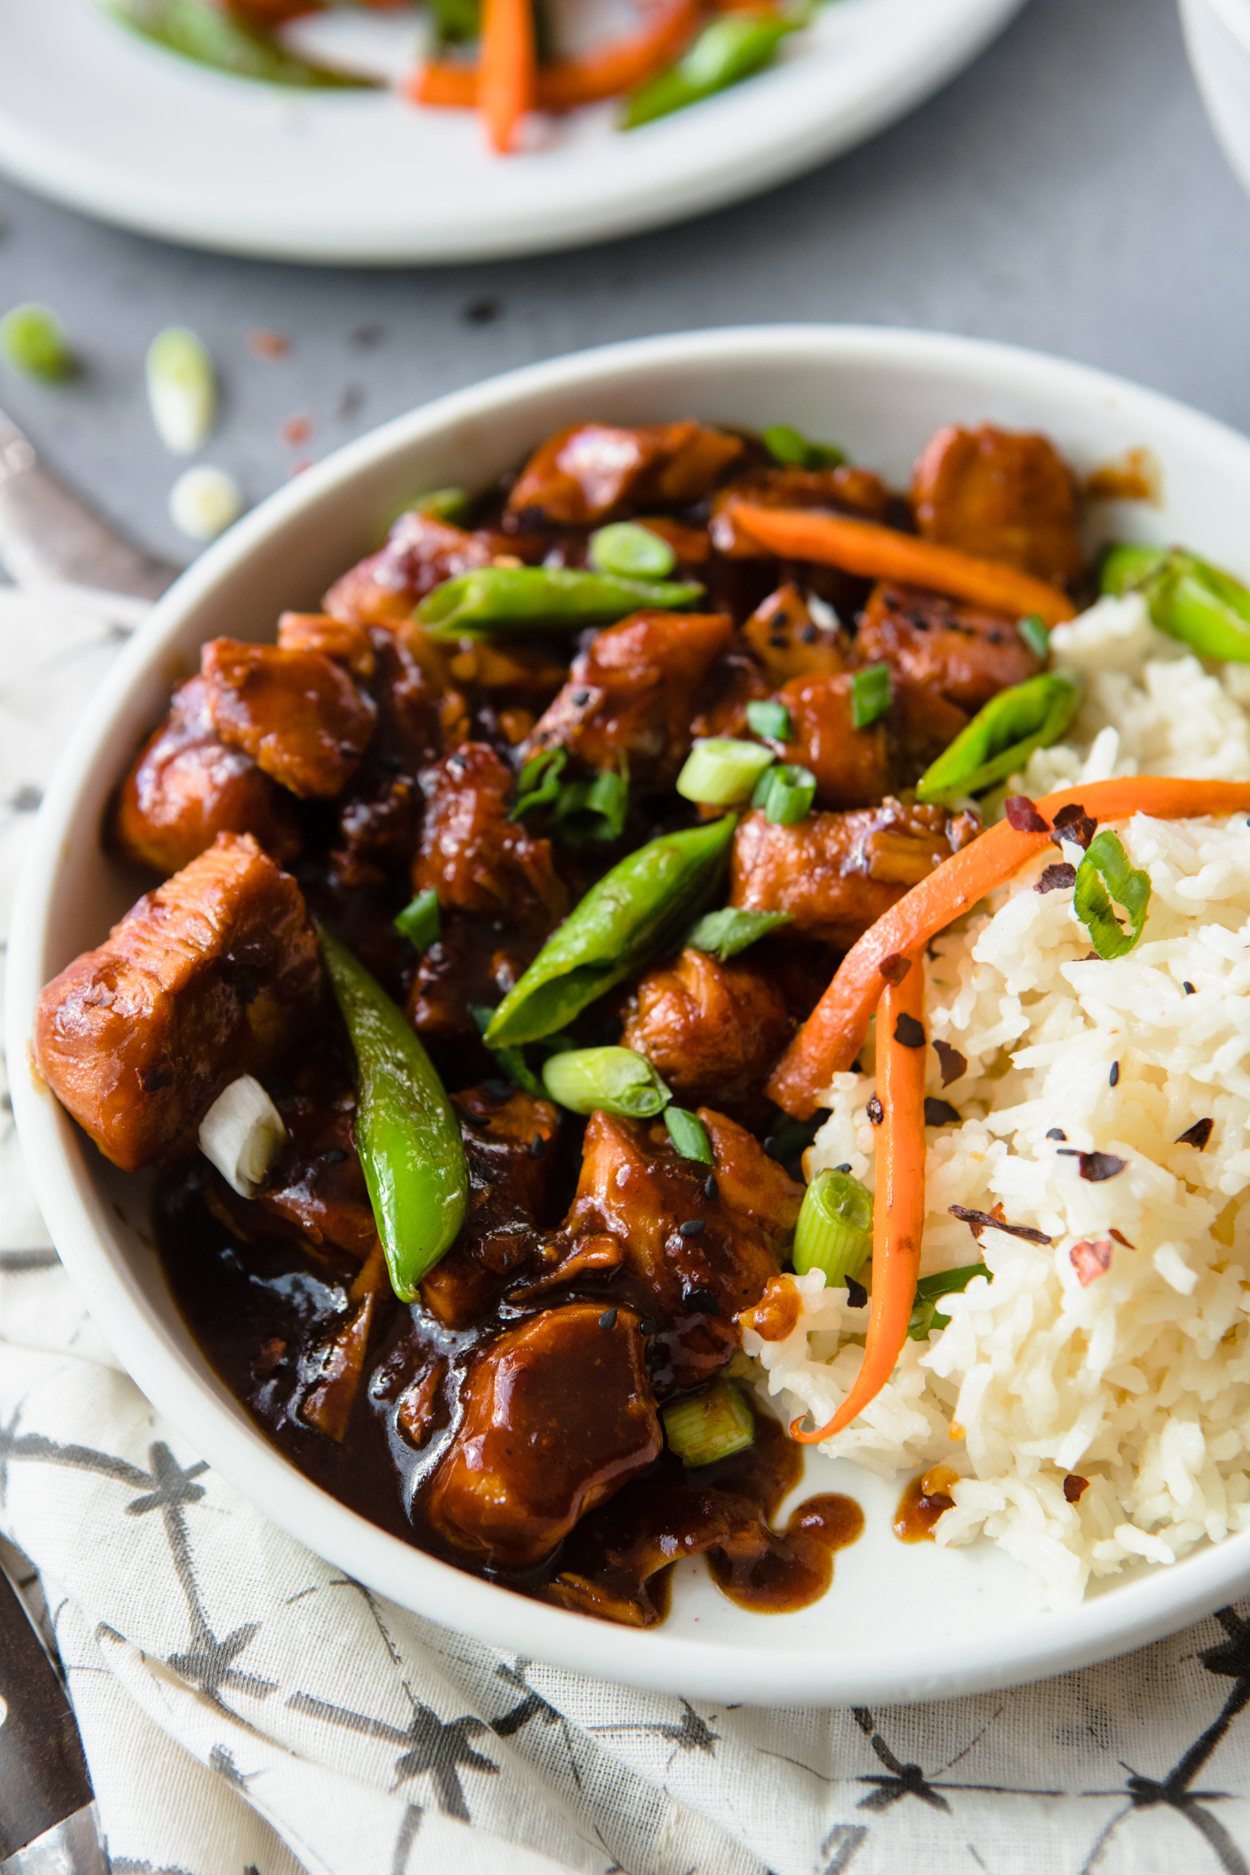 Instant Pot General Tso's Chicken garnished with carrots and greens, with white rice on the side